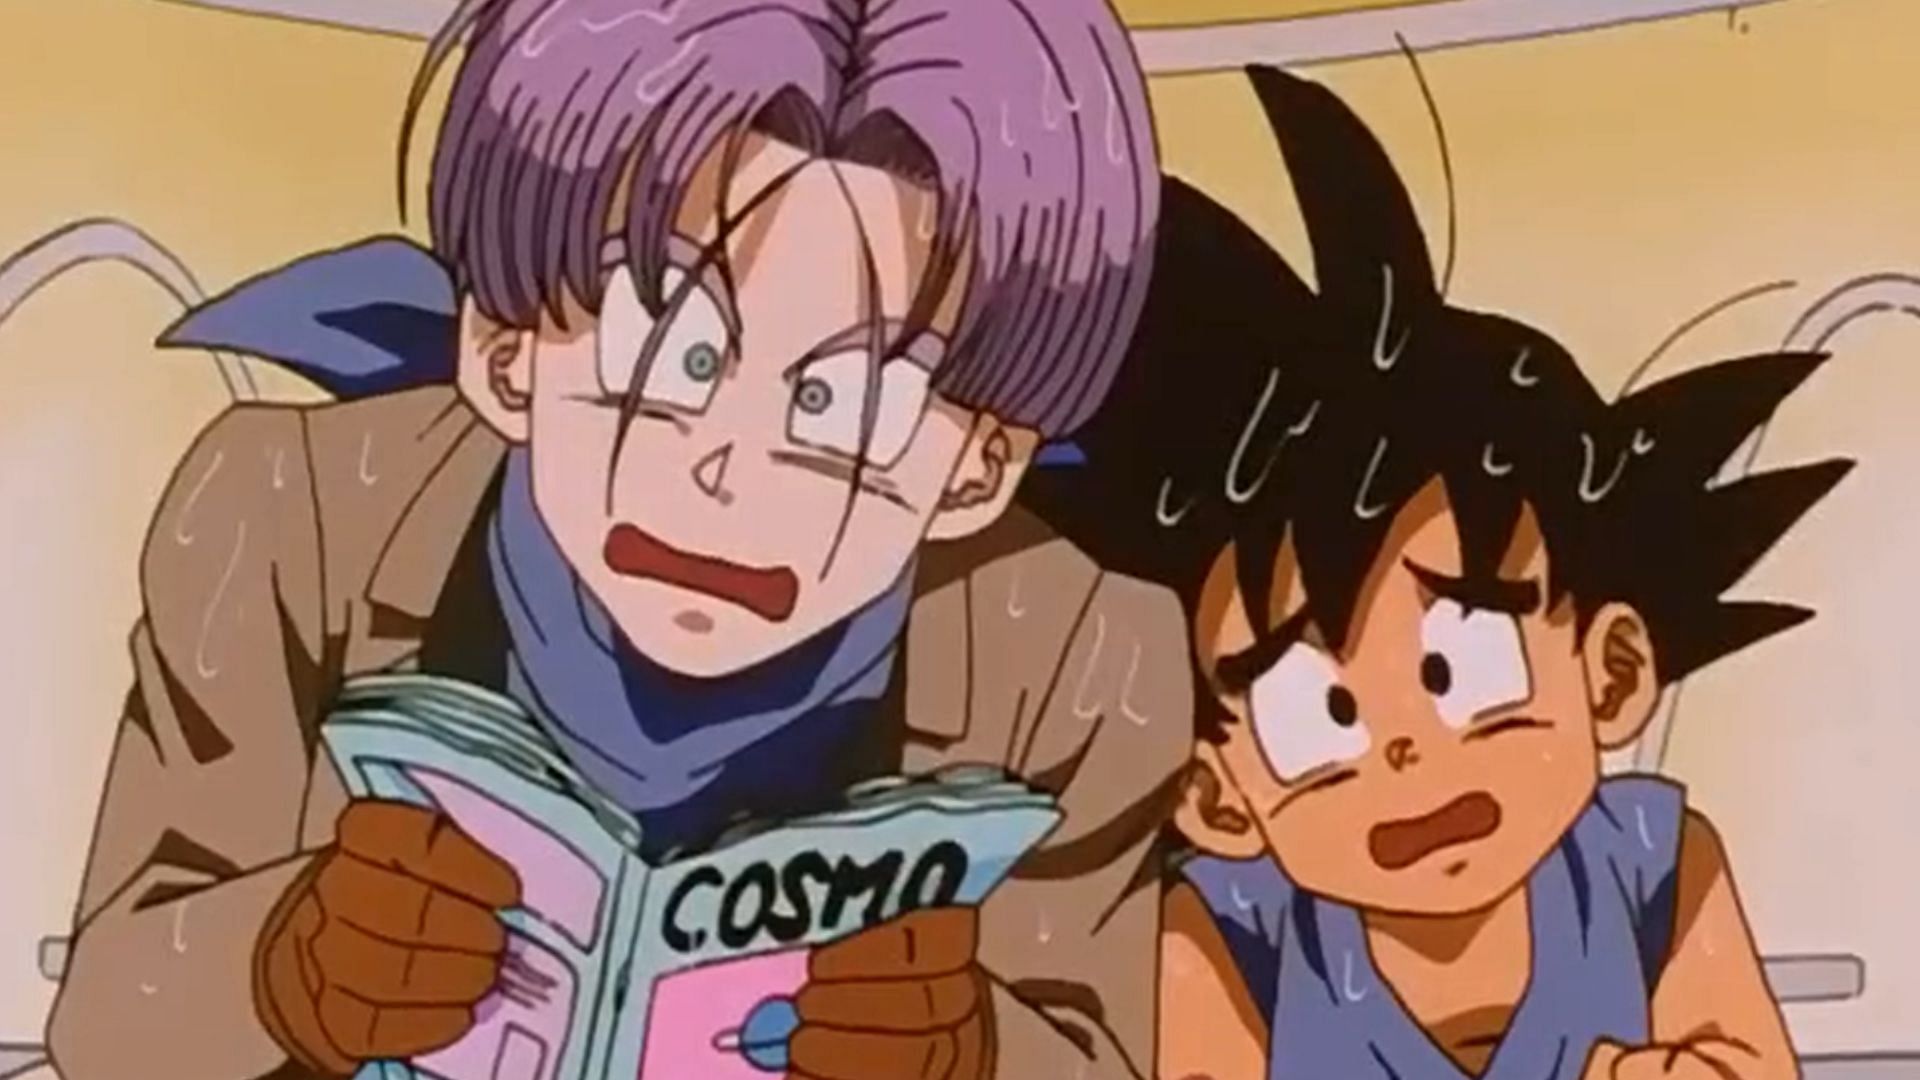 Trunks and Goku as seen in the anime (Image via Toein Animation)